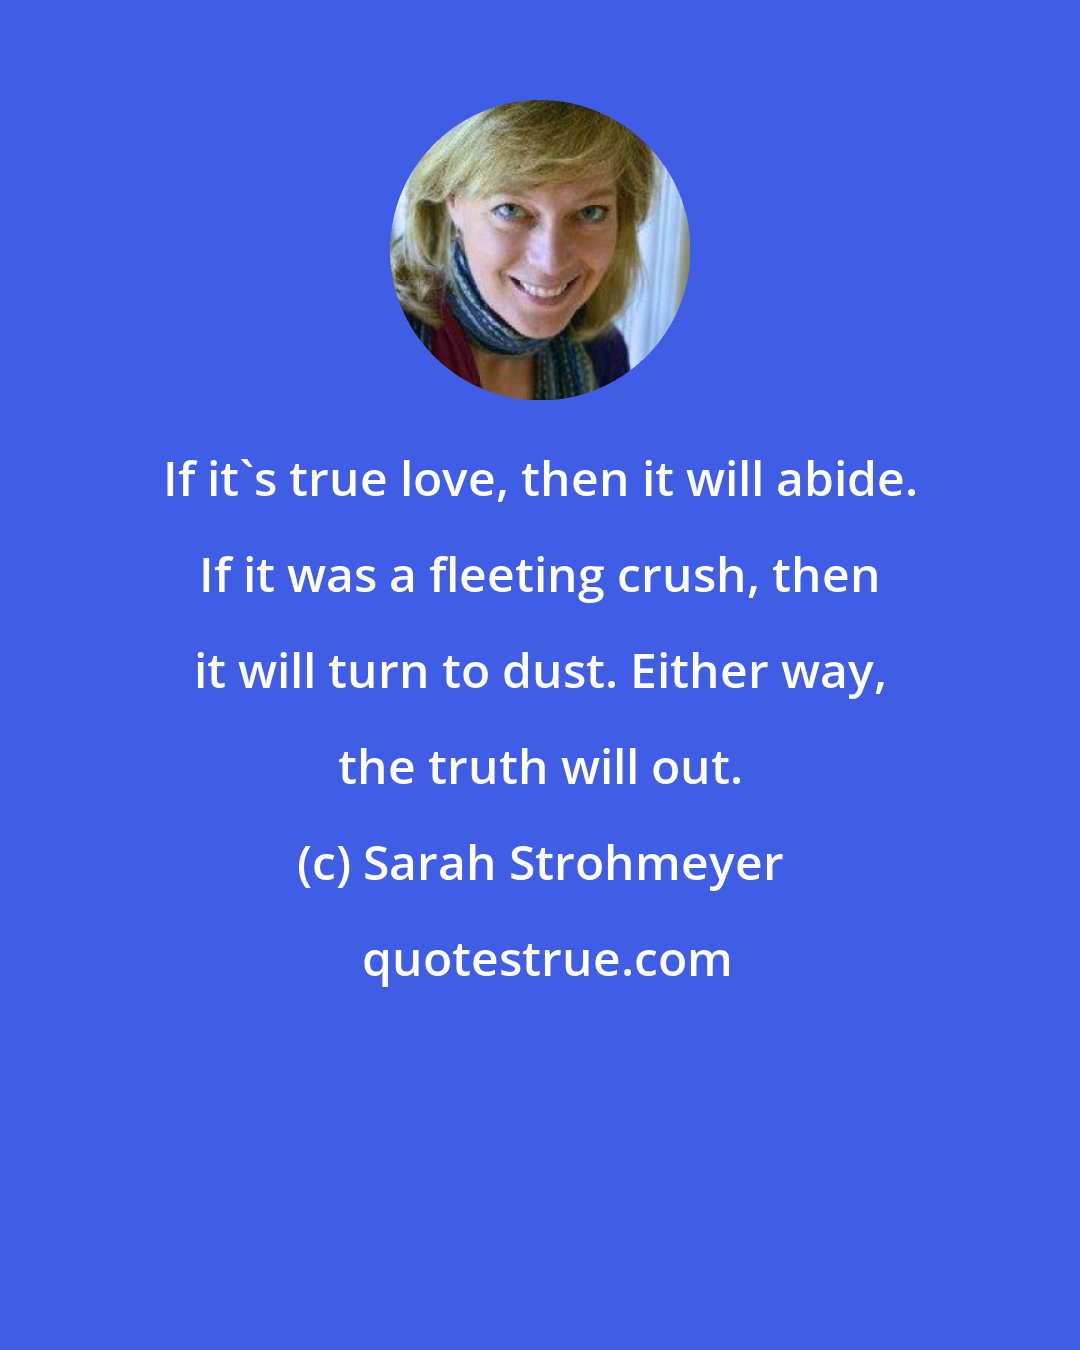 Sarah Strohmeyer: If it's true love, then it will abide. If it was a fleeting crush, then it will turn to dust. Either way, the truth will out.